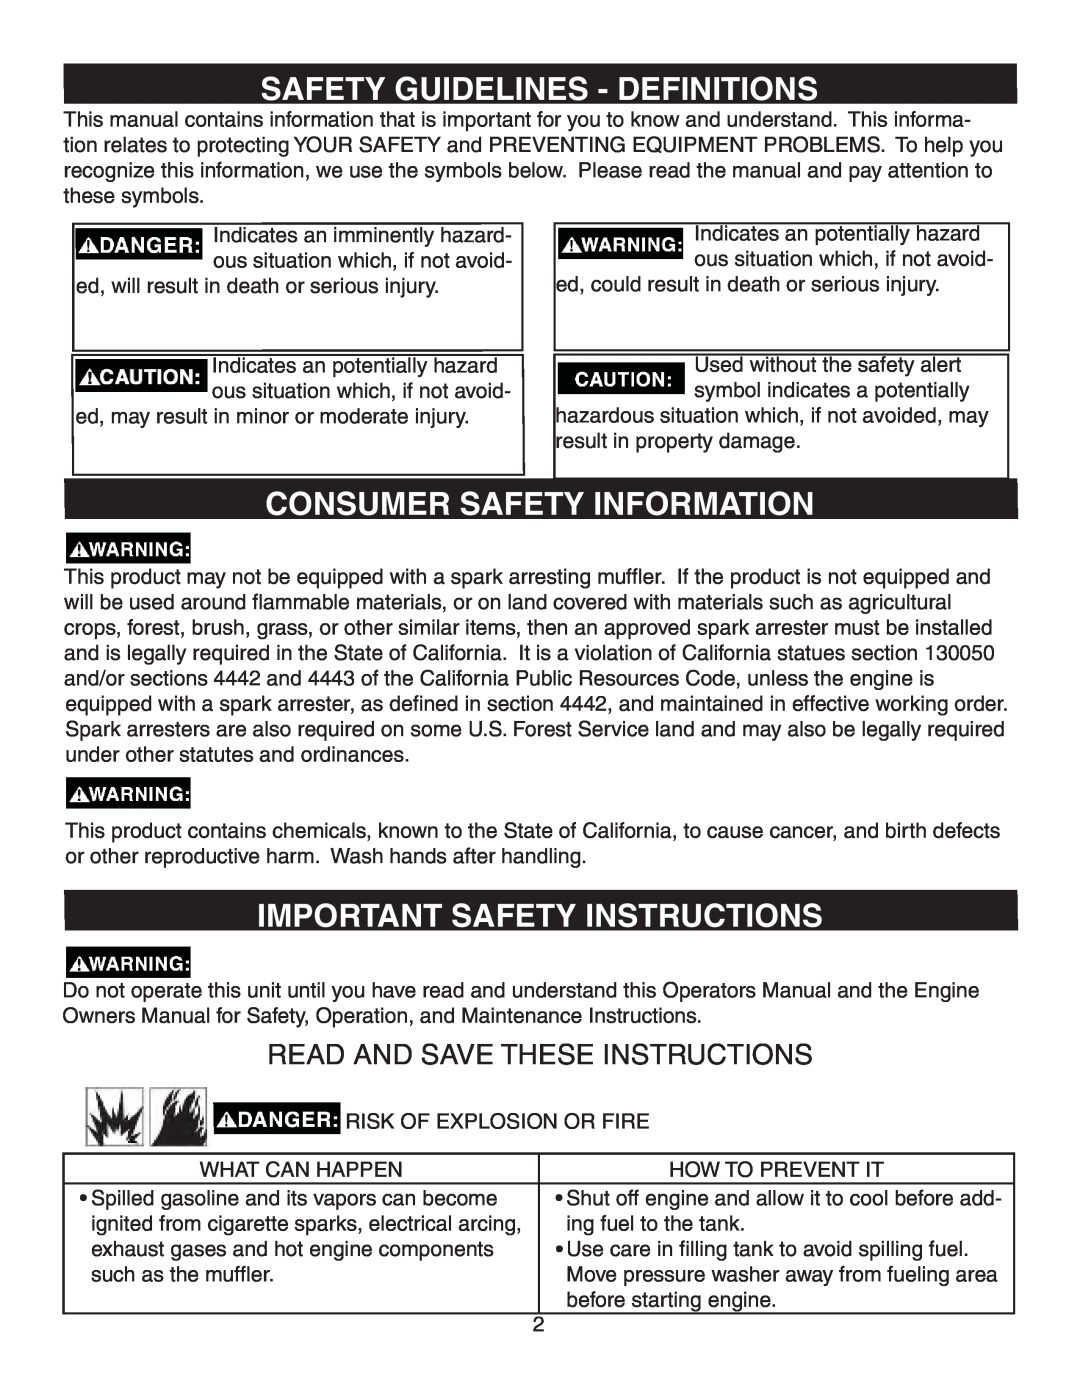 Simpson V3100 warranty Safety Guidelines - Definitions, Consumer Safety Information, Important Safety Instructions 